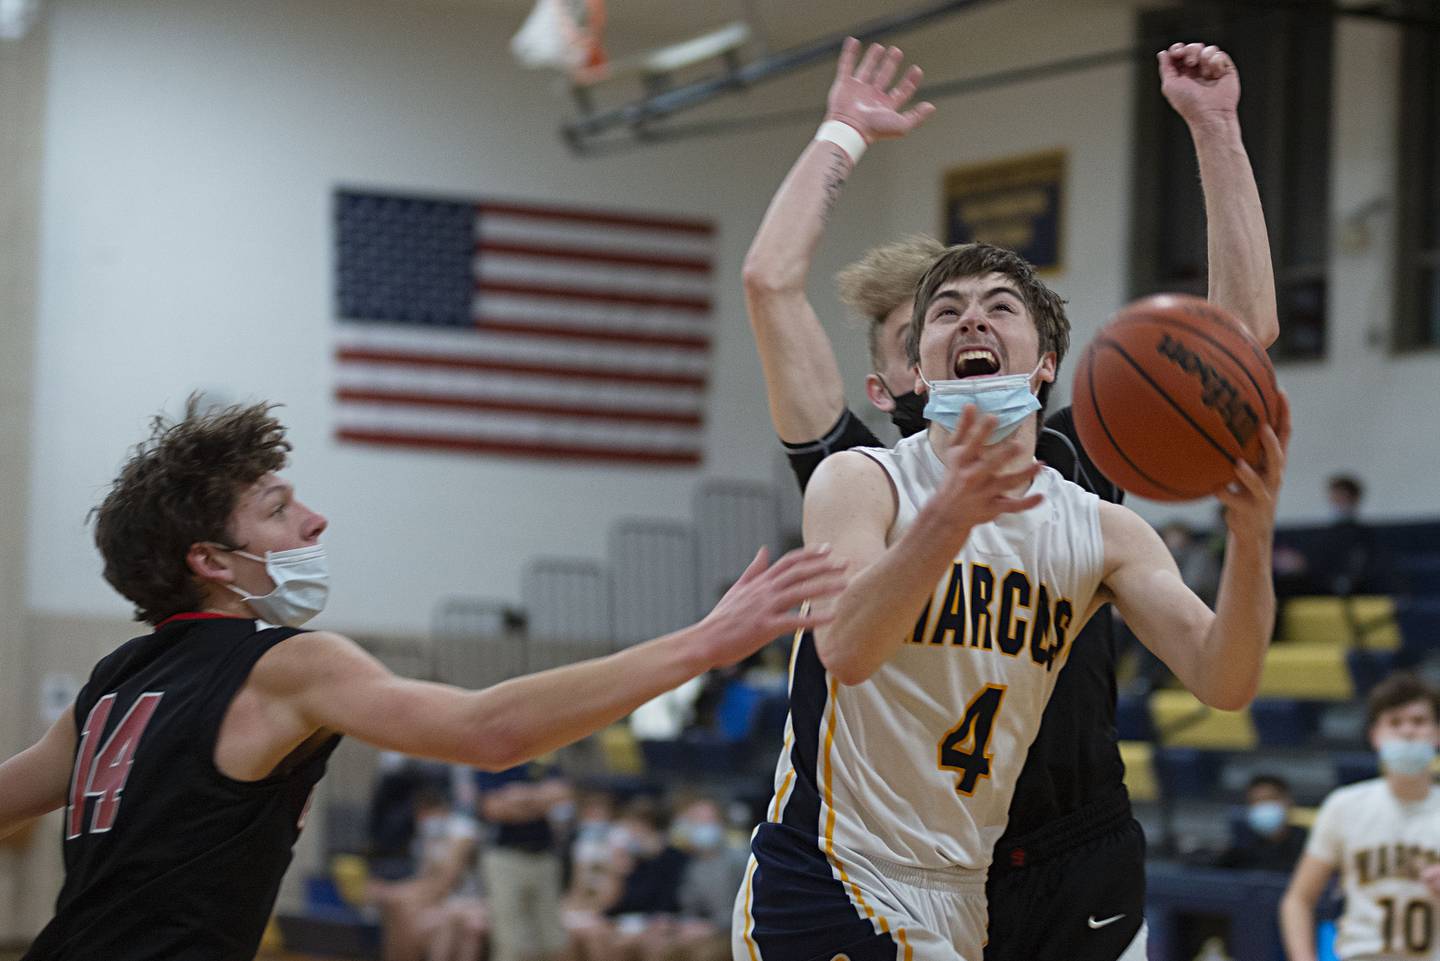 Polo's Brock Soltow drives the lane against Amboy on Wednesday, Jan. 26, 2022.